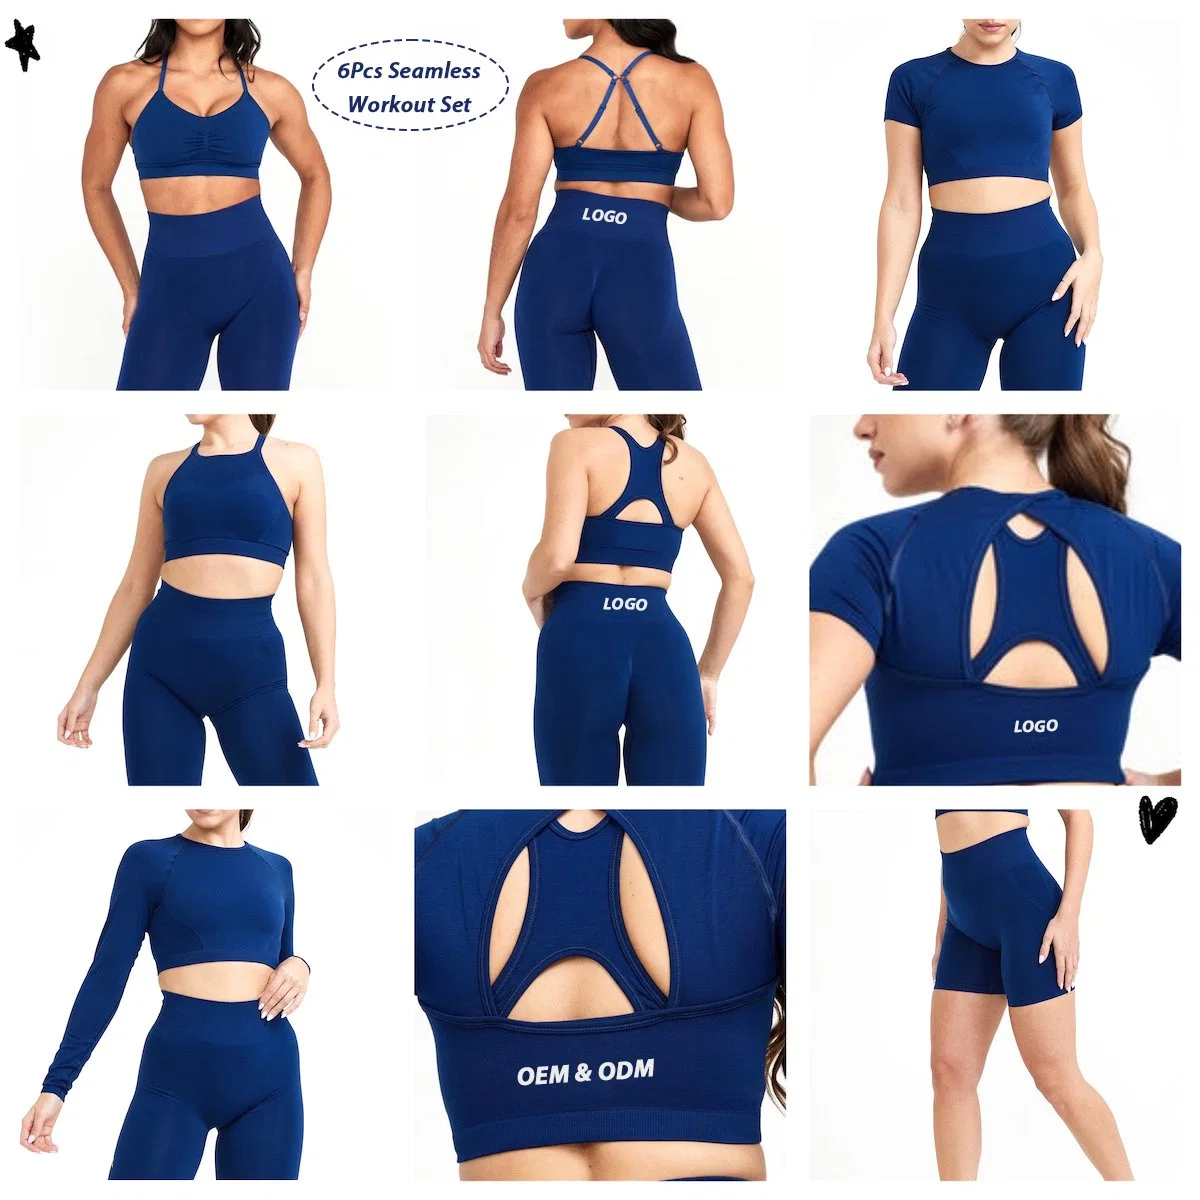 Wholesale 6 Piece Exqusite Sexy Open Back Seamless Yoga Workout Clothes for Women, Custom Gym Bra + Crop Top + Running Shorts + Leggings Quality Activewear Set